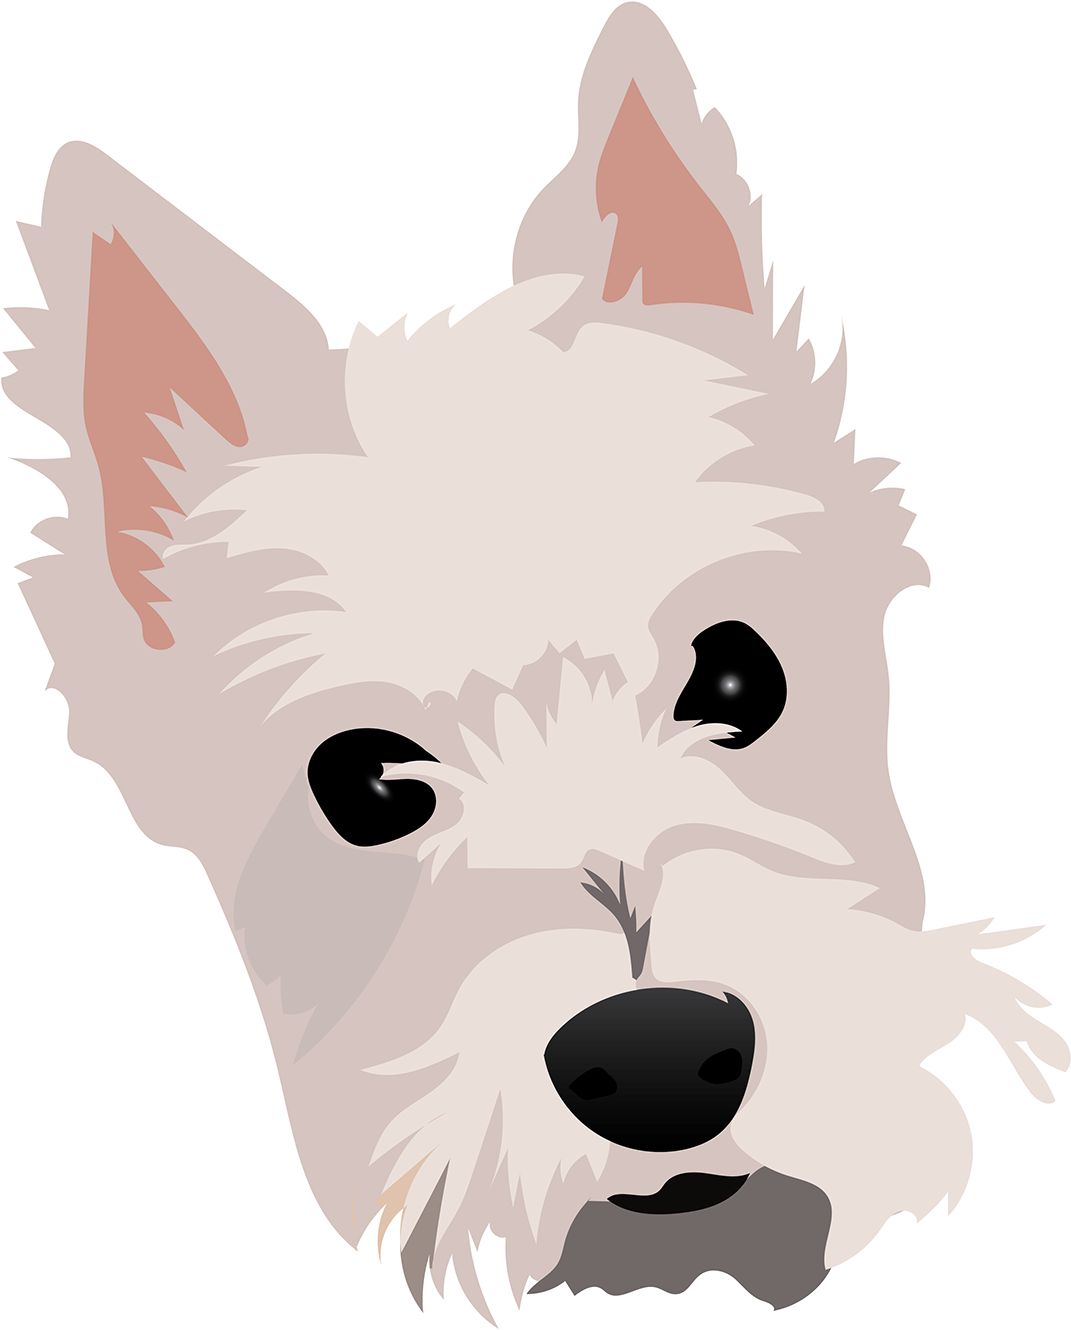 Thank You - West Highland White Terrier (1400x1616)